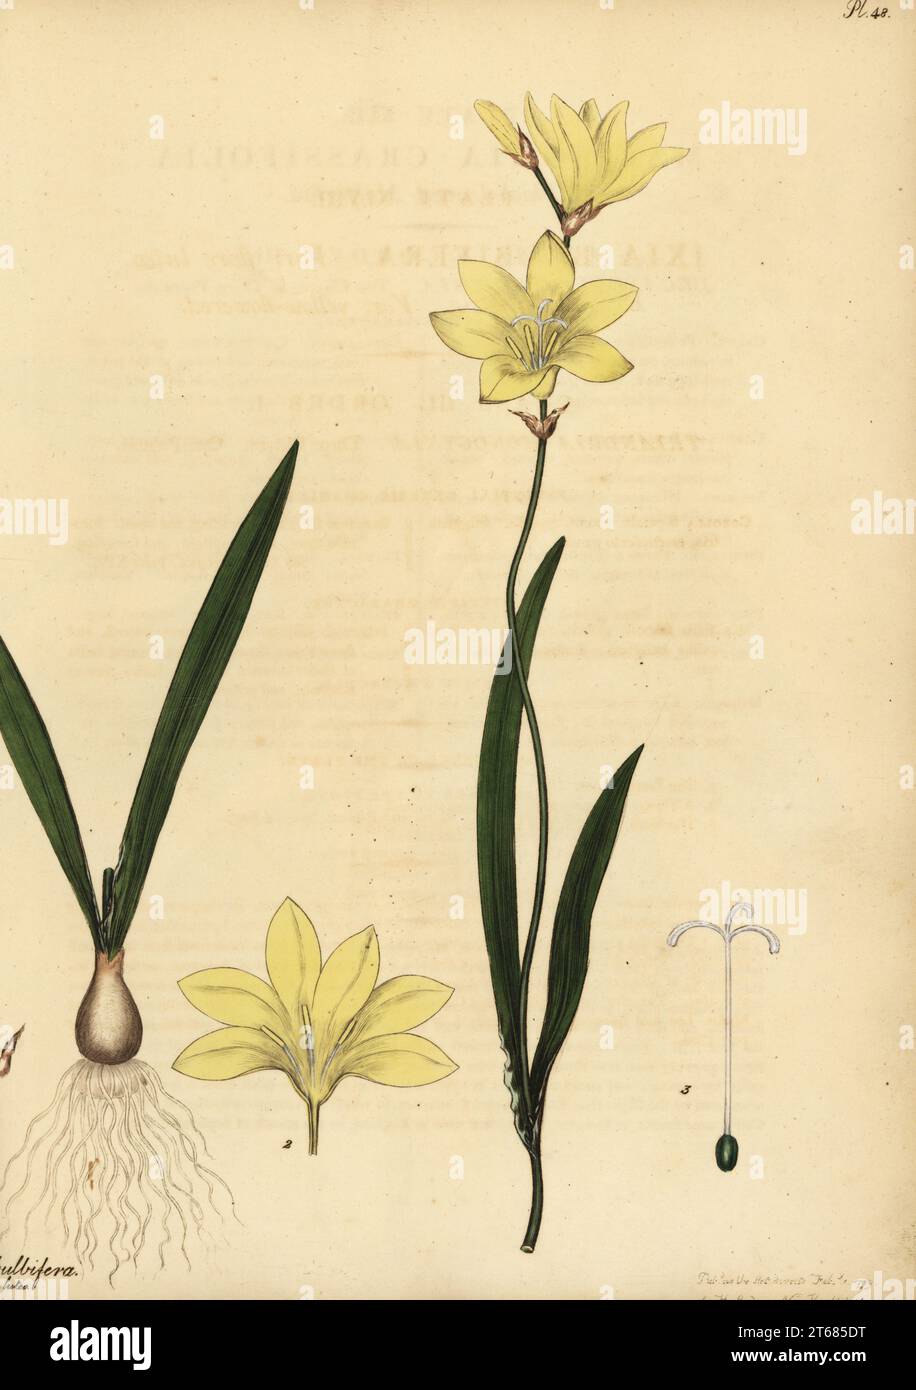 Harlequin flower, Sparaxis bulbifera. Bulb-bearing ixia, var. yellow flowered, Ixia bulbifera var. flore luteo. Copperplate engraving drawn, engraved and hand-coloured by Henry Andrews from his Botanical Register, Volume 1, published in London, 1799. Stock Photo